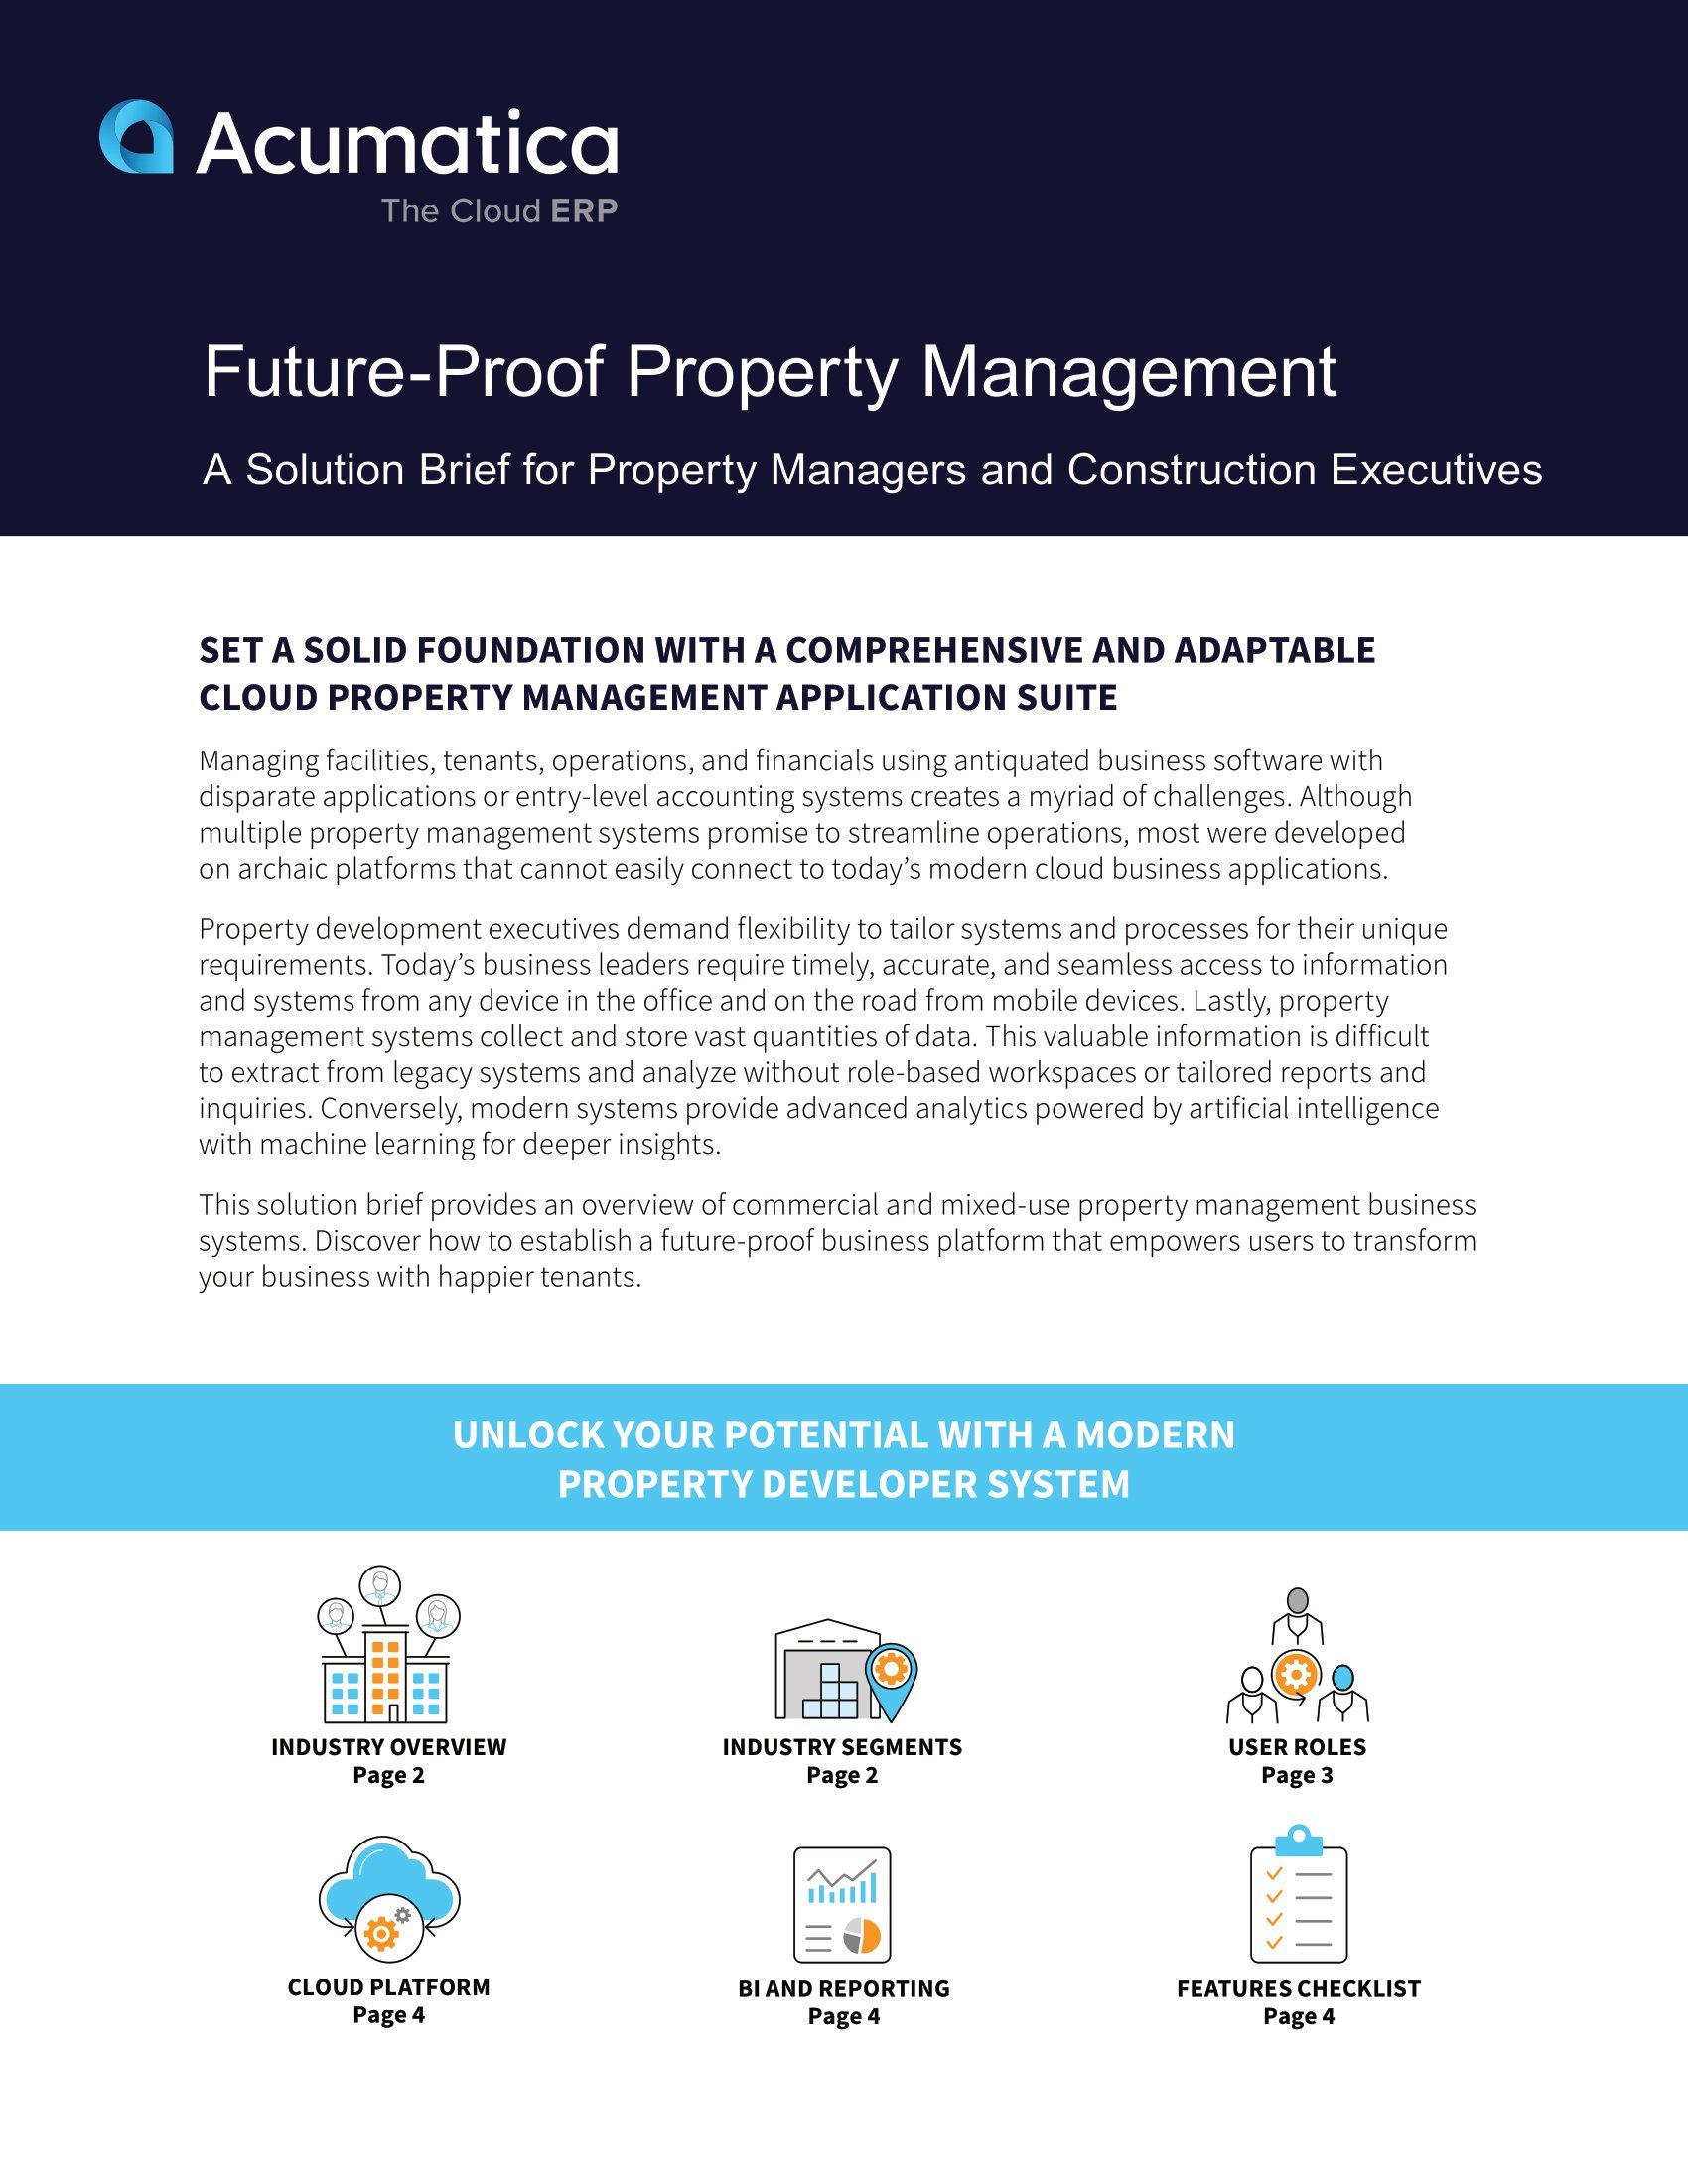 Serve Tenants Better with a Modern, Cloud-Based Property Management System  